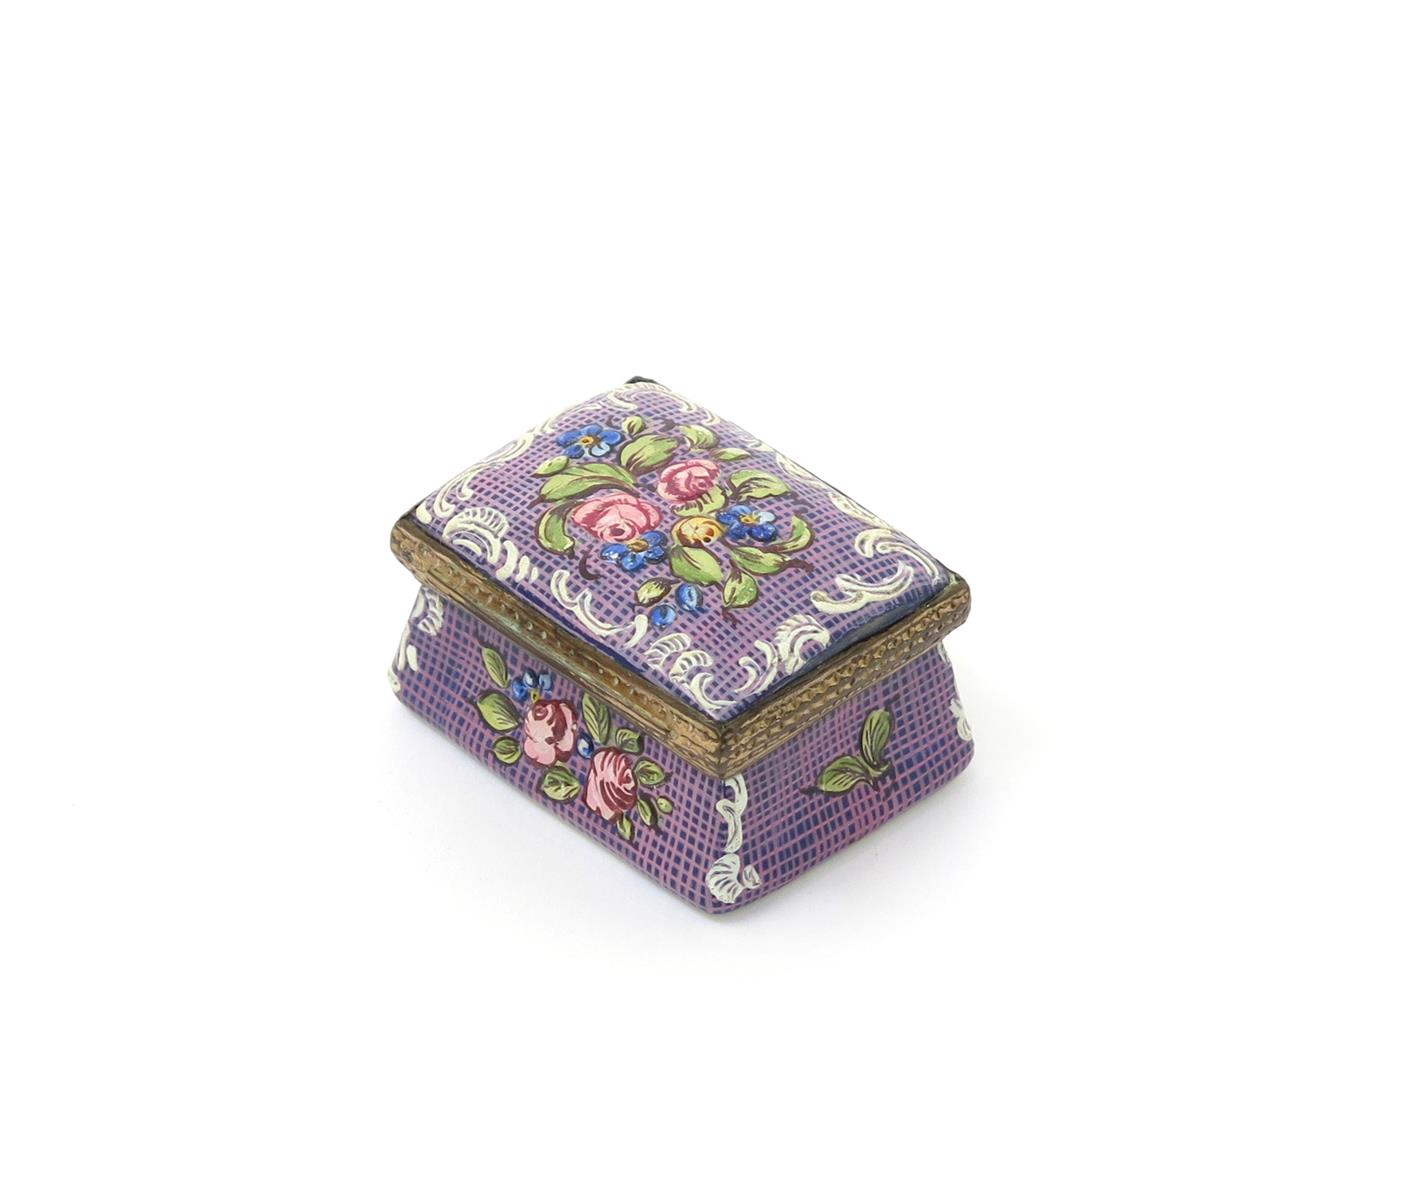 A Bilston enamel patch box, c.1780, the rectangular form painted with raised sprays of flowers - Image 2 of 2